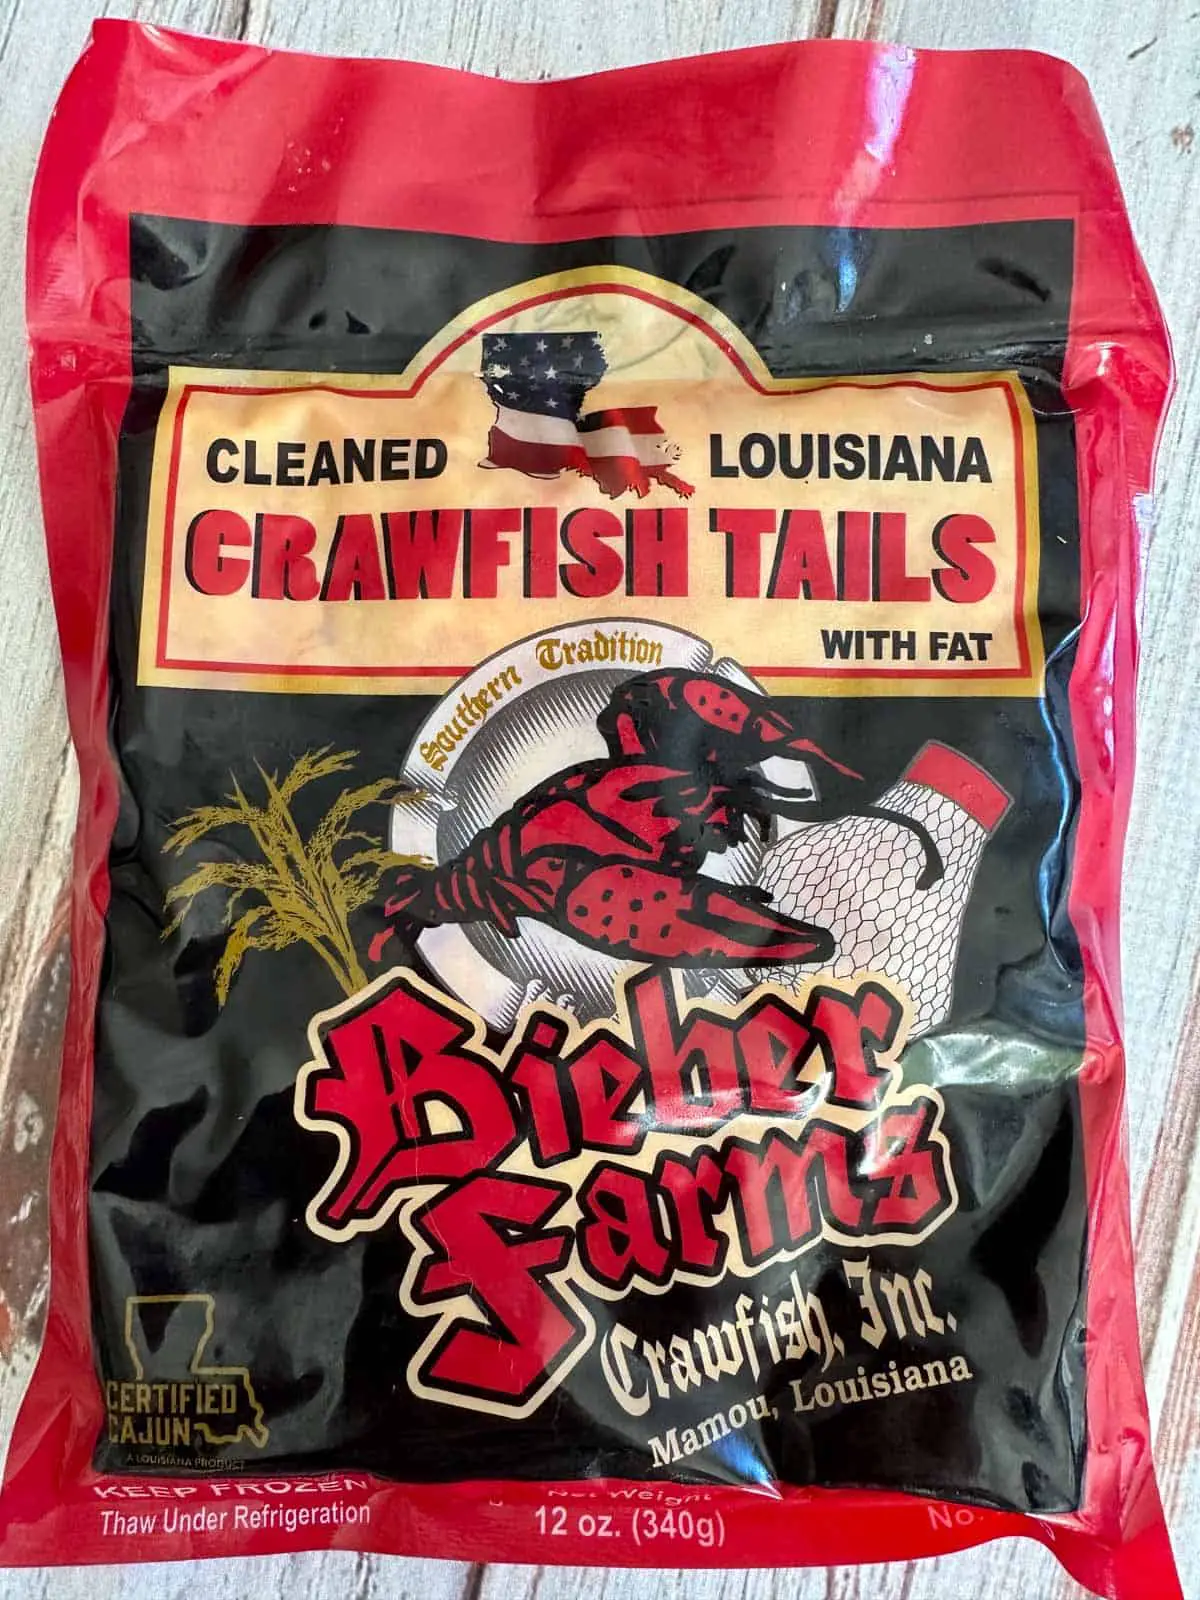 A package of cleaned Louisiana Crawfish Tails from Bieber Farms.